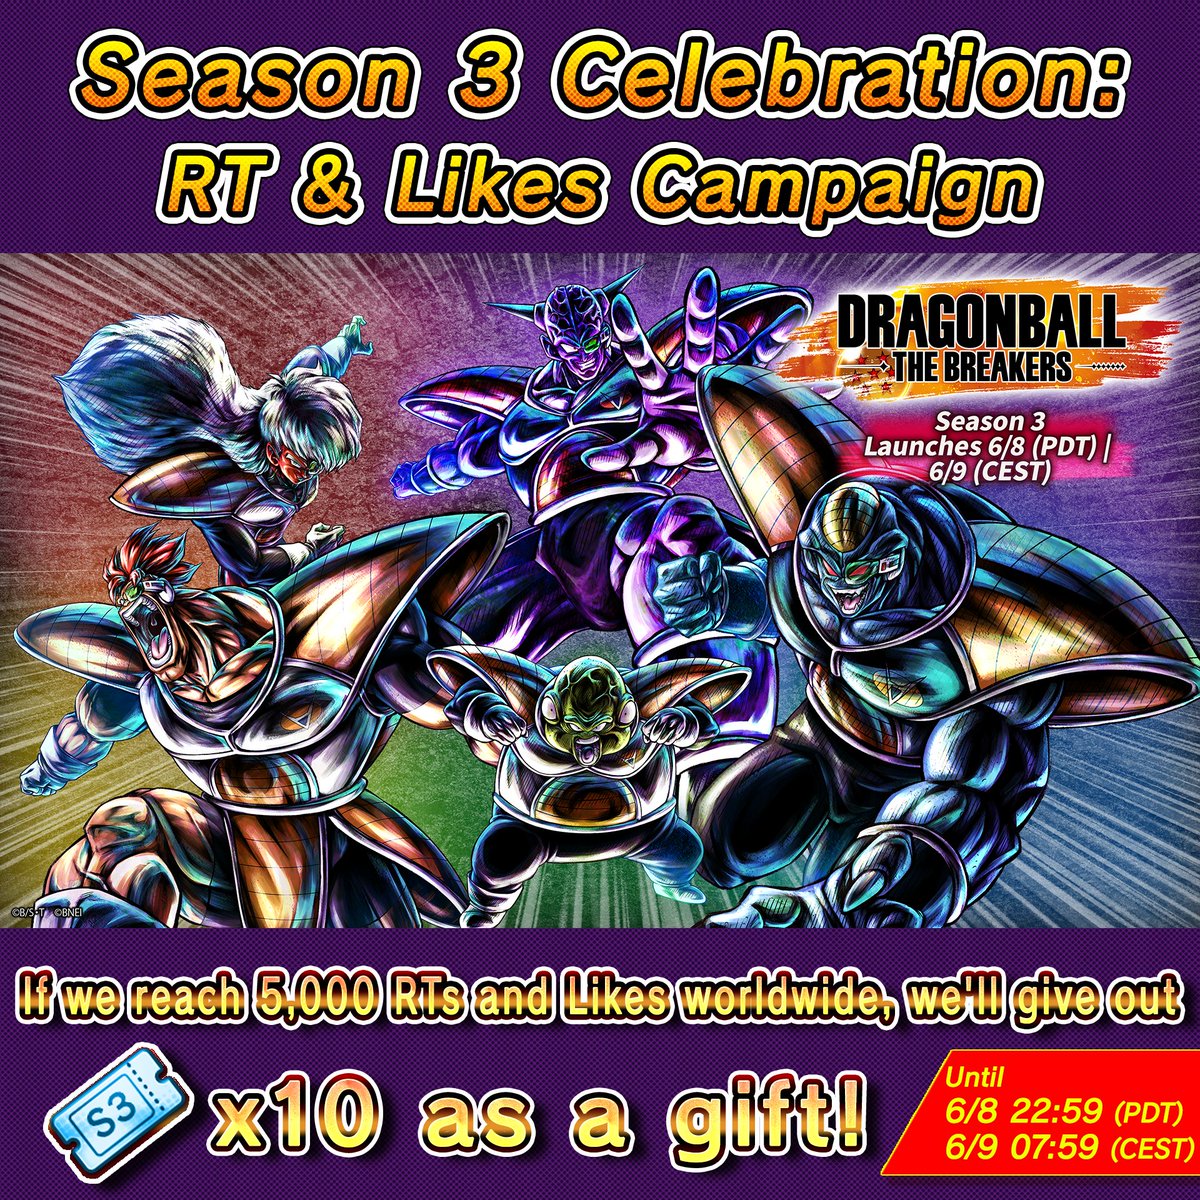 ◥◣◥◣◥◣ Season 3 Release Celebration
Retweet & Like Campaign ◥◣◥◣◥◣

Let's celebrate the release of #DBTB Season 3!
We will be giving out Season 3 Summon Ticket x 10 if we reach 5K Likes + RTs worldwide!

Campaign Period: Until 6/8 22:59 PDT | 6/9 7:59 CEST
#DBTB